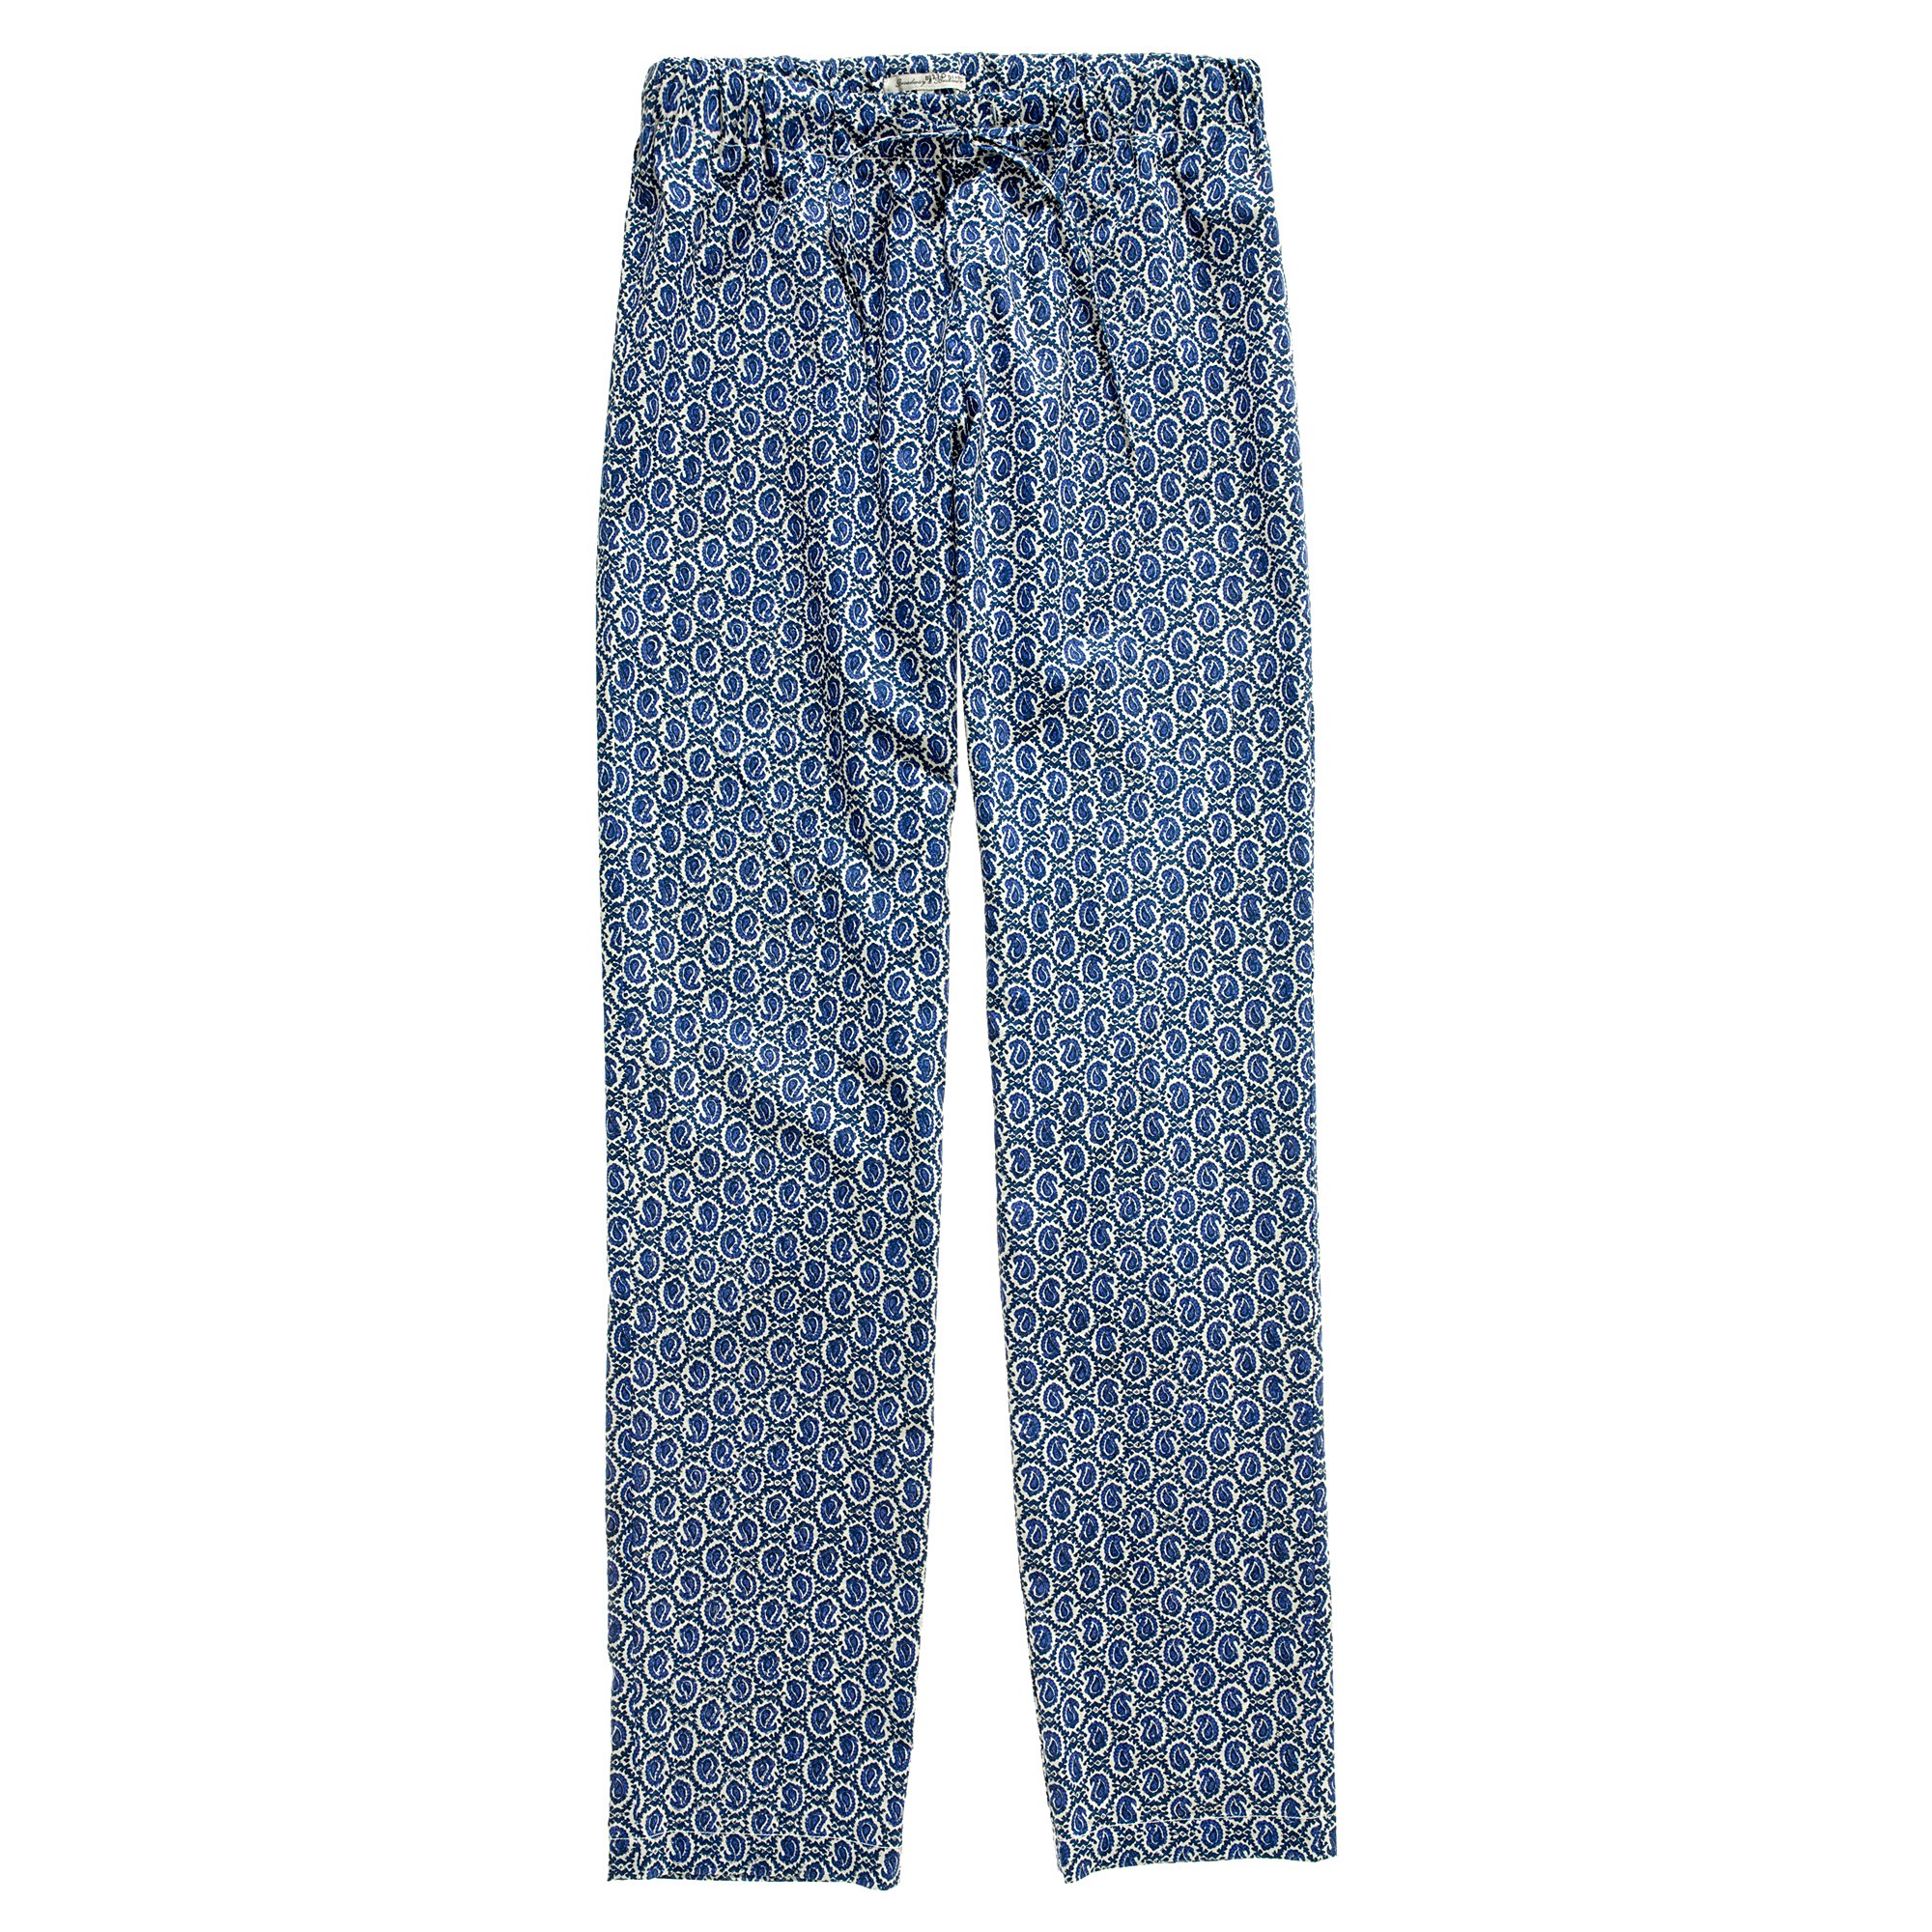 Lyst - Madewell Paisley Pajama Pants in Blue